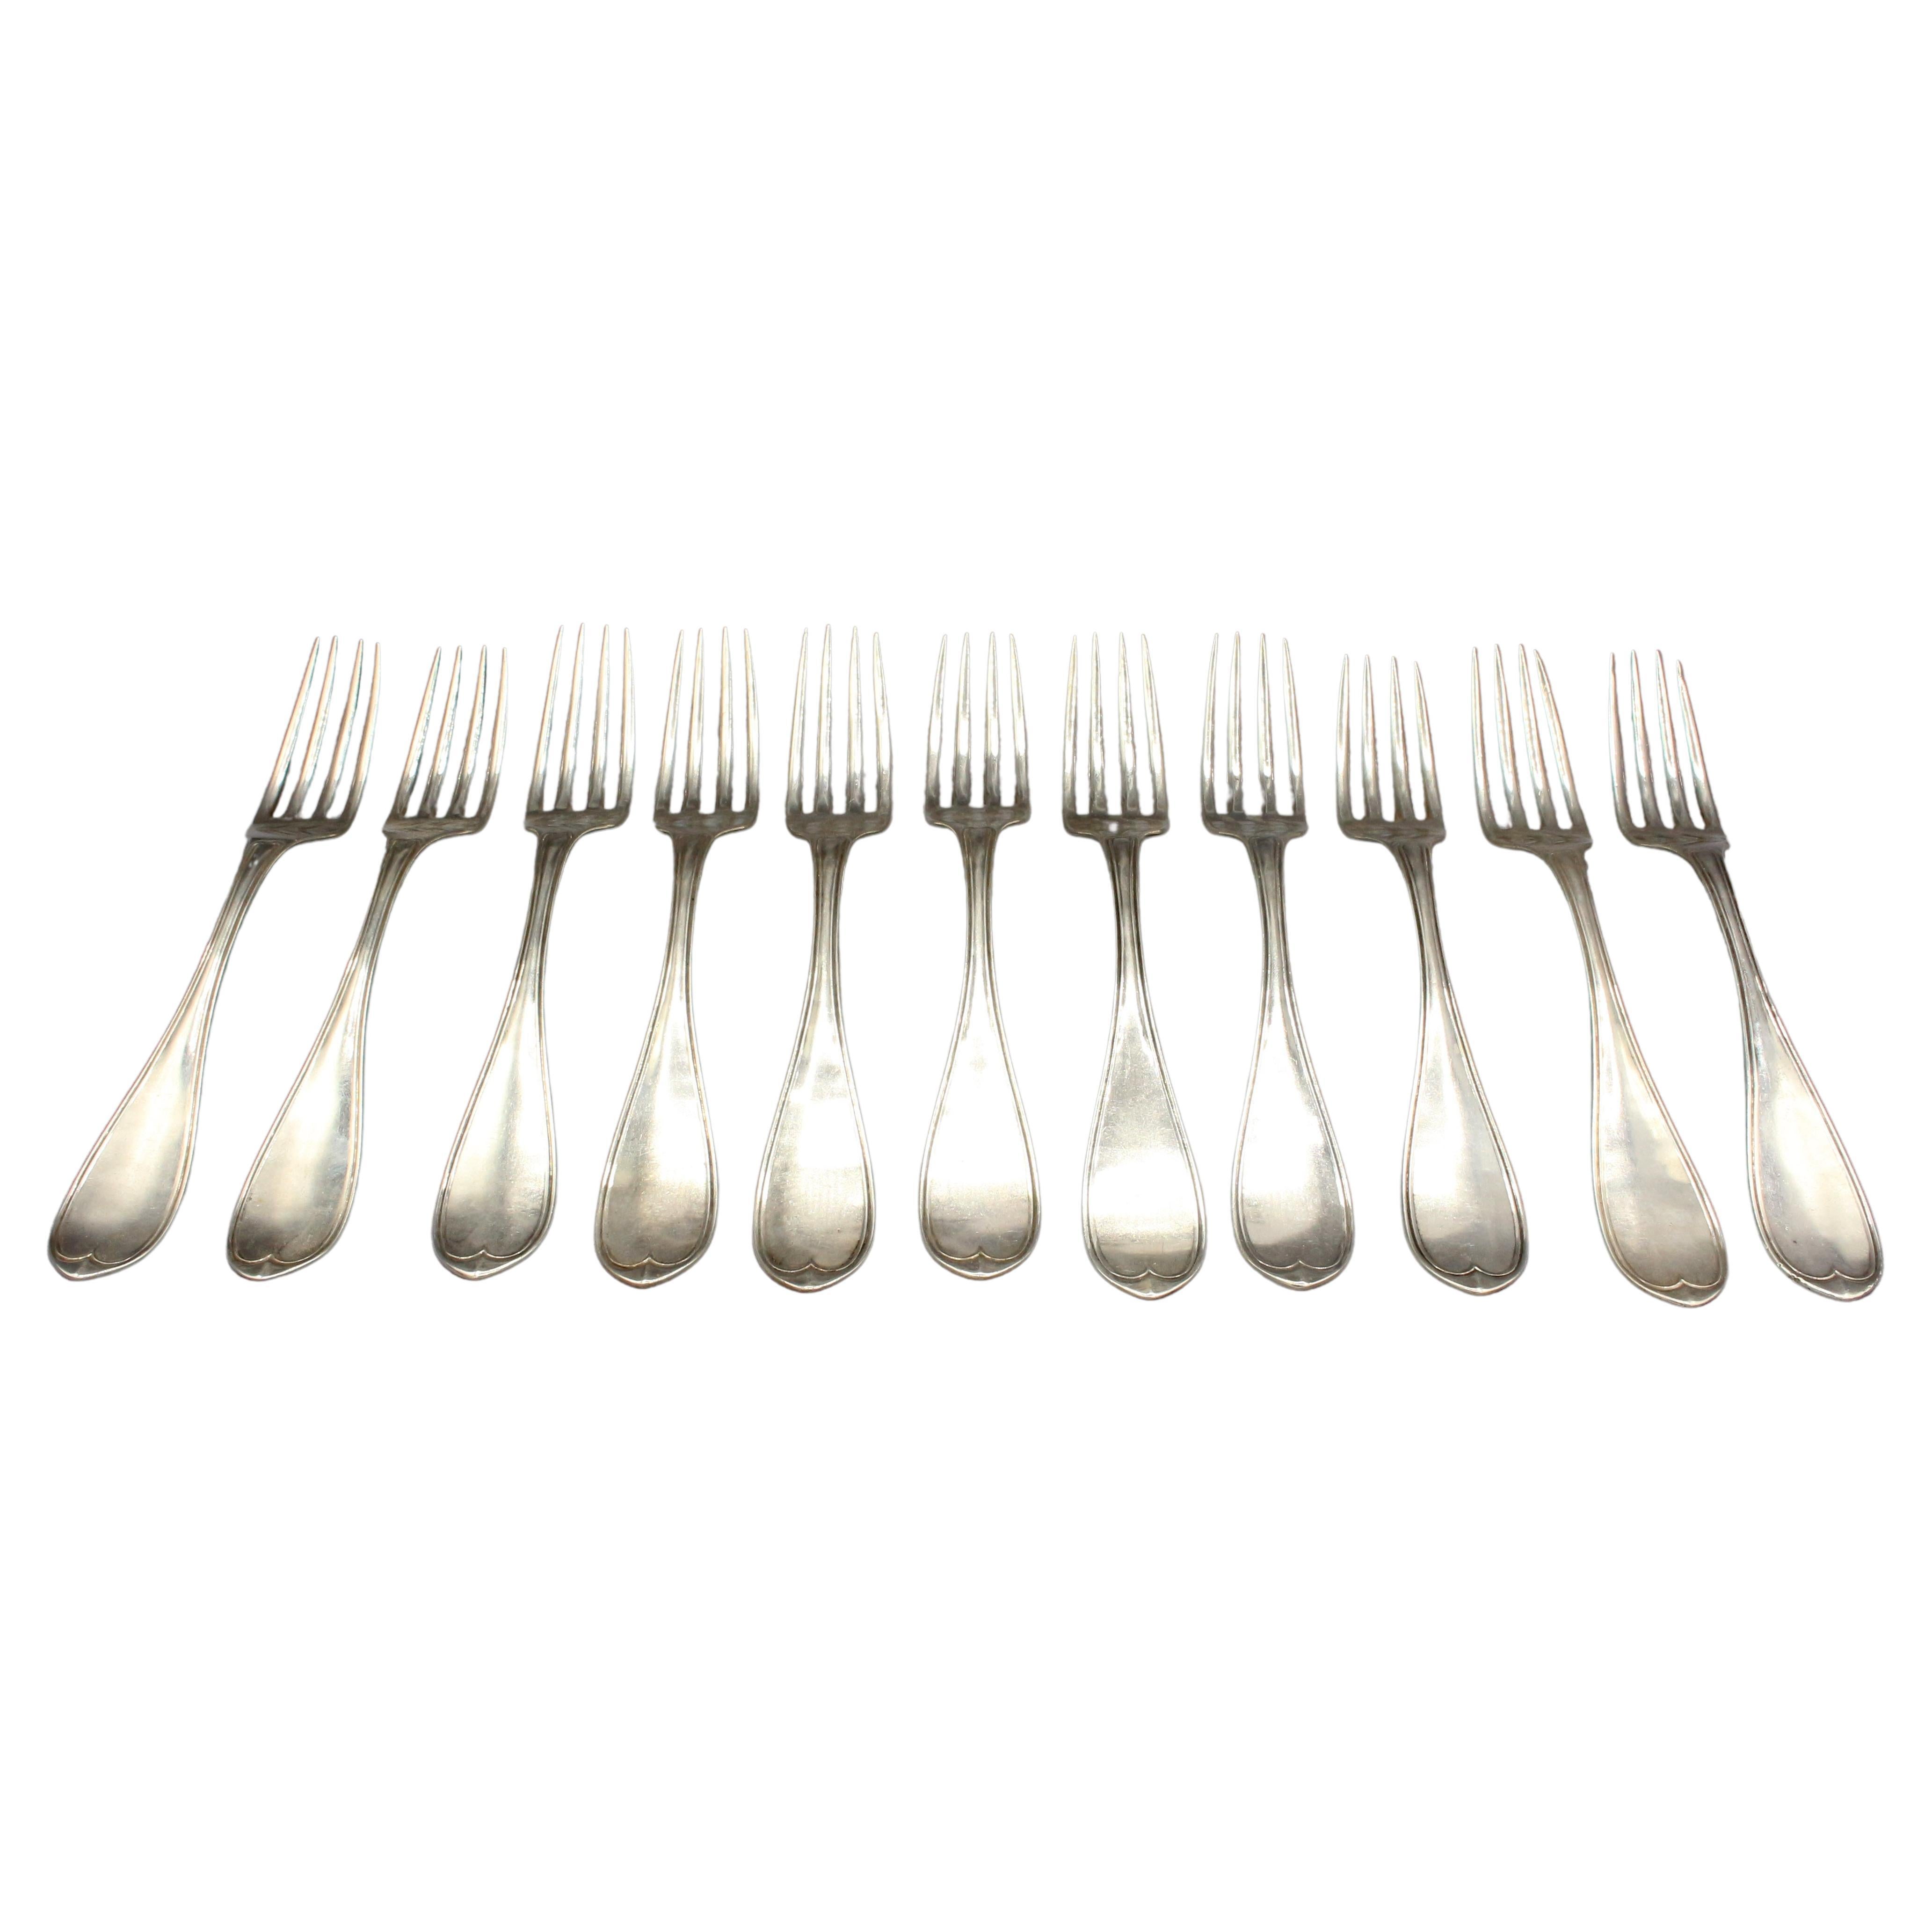 Circa 1850 Set of 11 Coin Silver Dinner Forks by Wood & Hughes For Sale